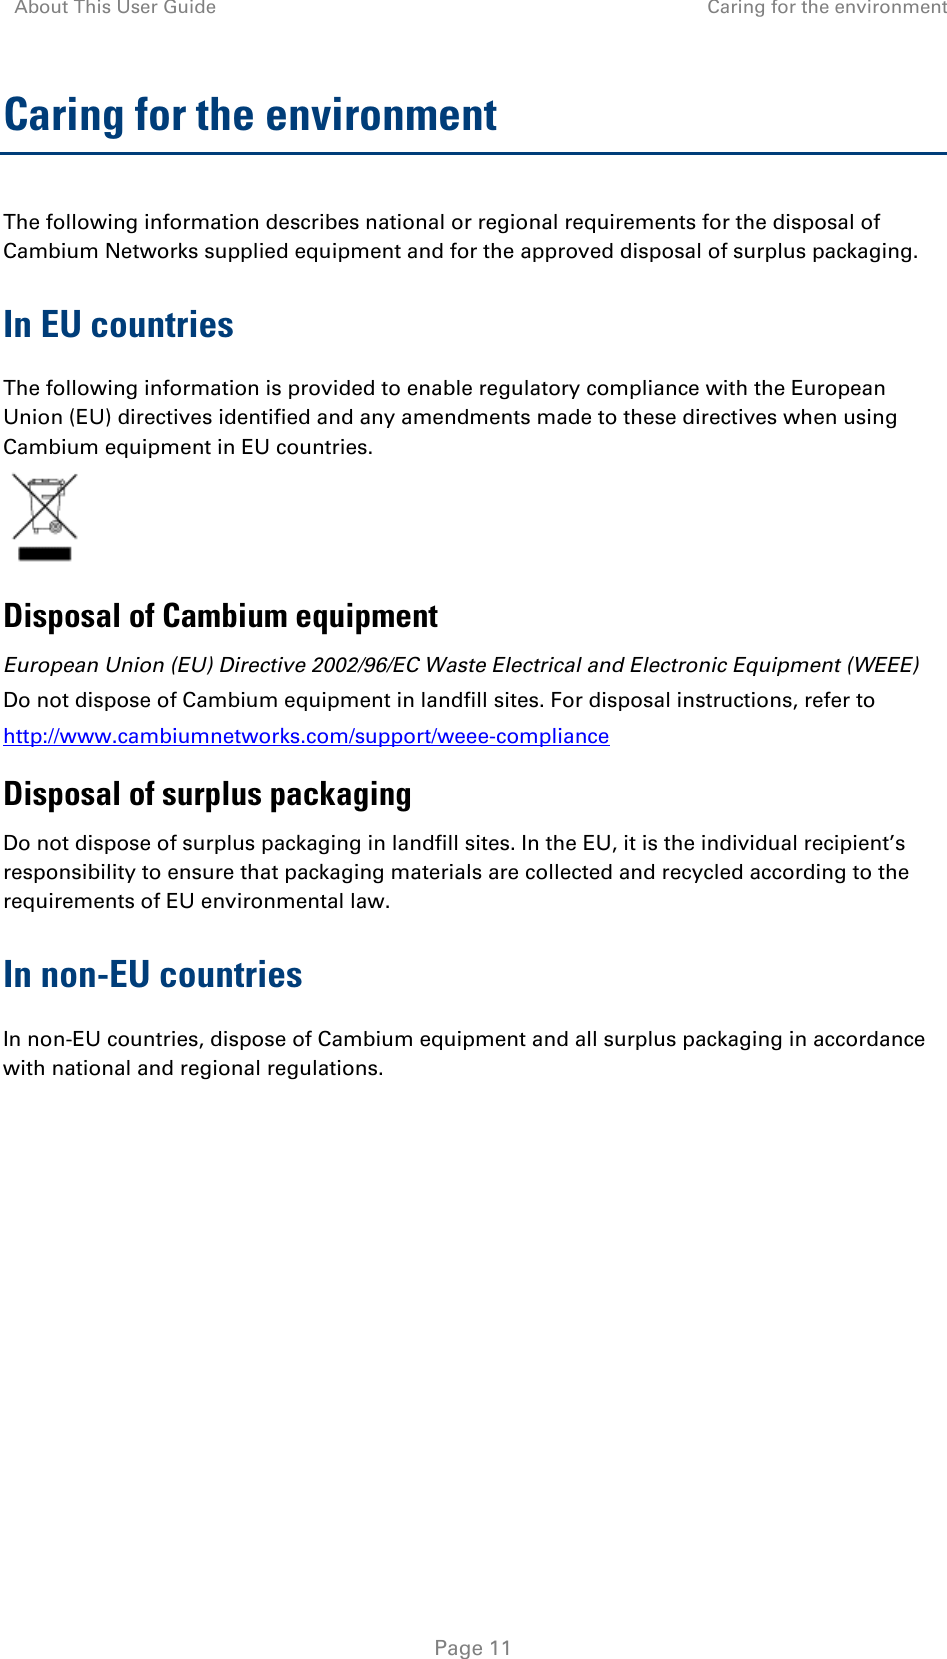 About This User Guide Caring for the environment   Page 11 Caring for the environment The following information describes national or regional requirements for the disposal of Cambium Networks supplied equipment and for the approved disposal of surplus packaging. In EU countries The following information is provided to enable regulatory compliance with the European Union (EU) directives identified and any amendments made to these directives when using Cambium equipment in EU countries.  Disposal of Cambium equipment European Union (EU) Directive 2002/96/EC Waste Electrical and Electronic Equipment (WEEE) Do not dispose of Cambium equipment in landfill sites. For disposal instructions, refer to  http://www.cambiumnetworks.com/support/weee-compliance Disposal of surplus packaging Do not dispose of surplus packaging in landfill sites. In the EU, it is the individual recipient’s responsibility to ensure that packaging materials are collected and recycled according to the requirements of EU environmental law. In non-EU countries In non-EU countries, dispose of Cambium equipment and all surplus packaging in accordance with national and regional regulations.   